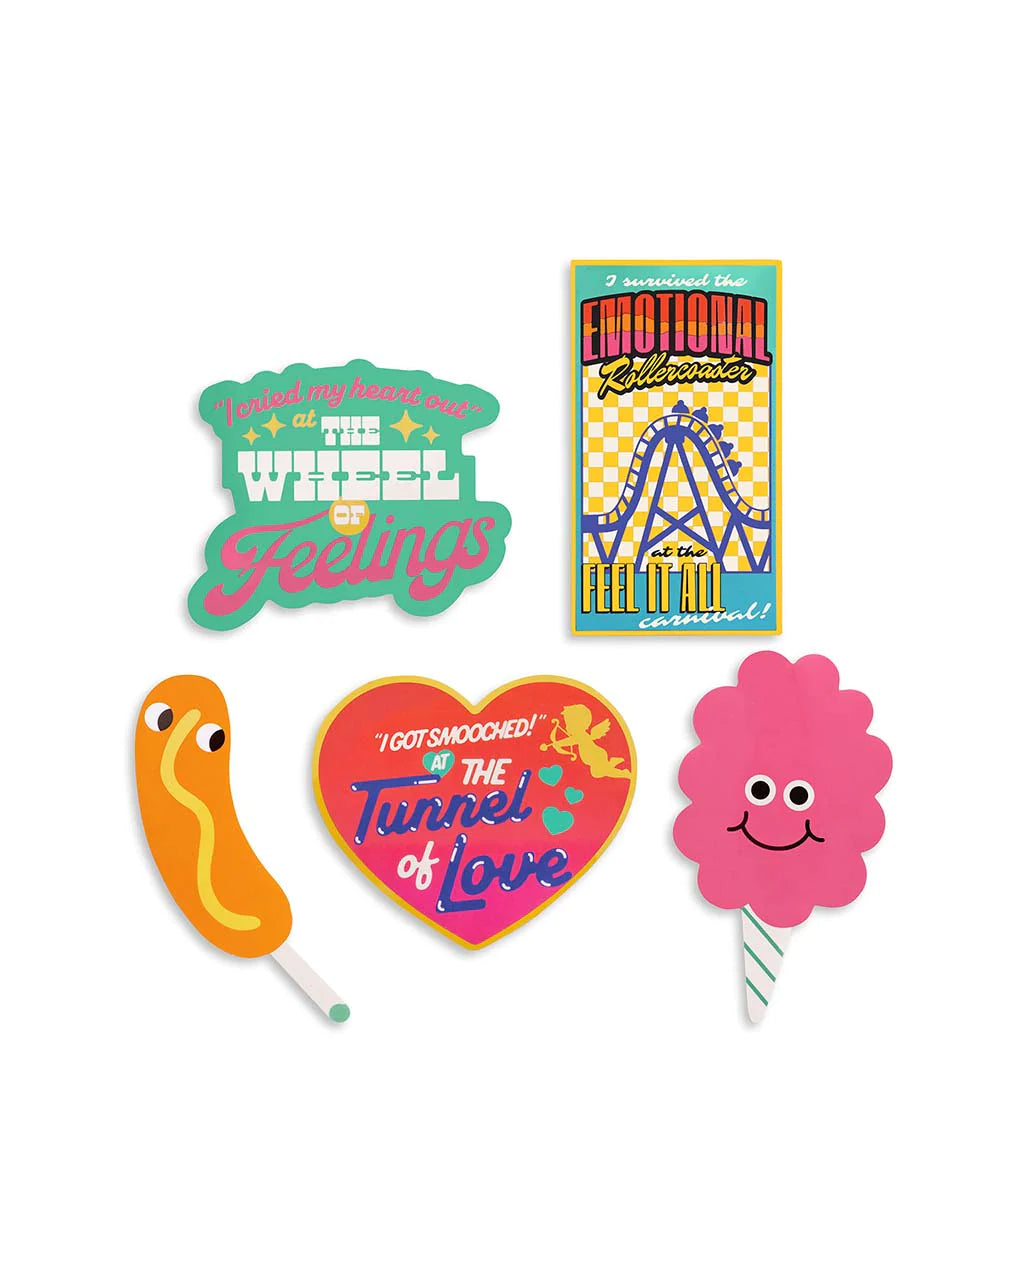 Stick with Vinyl stickers - Assorted 1-Fun-Little Fish Co.